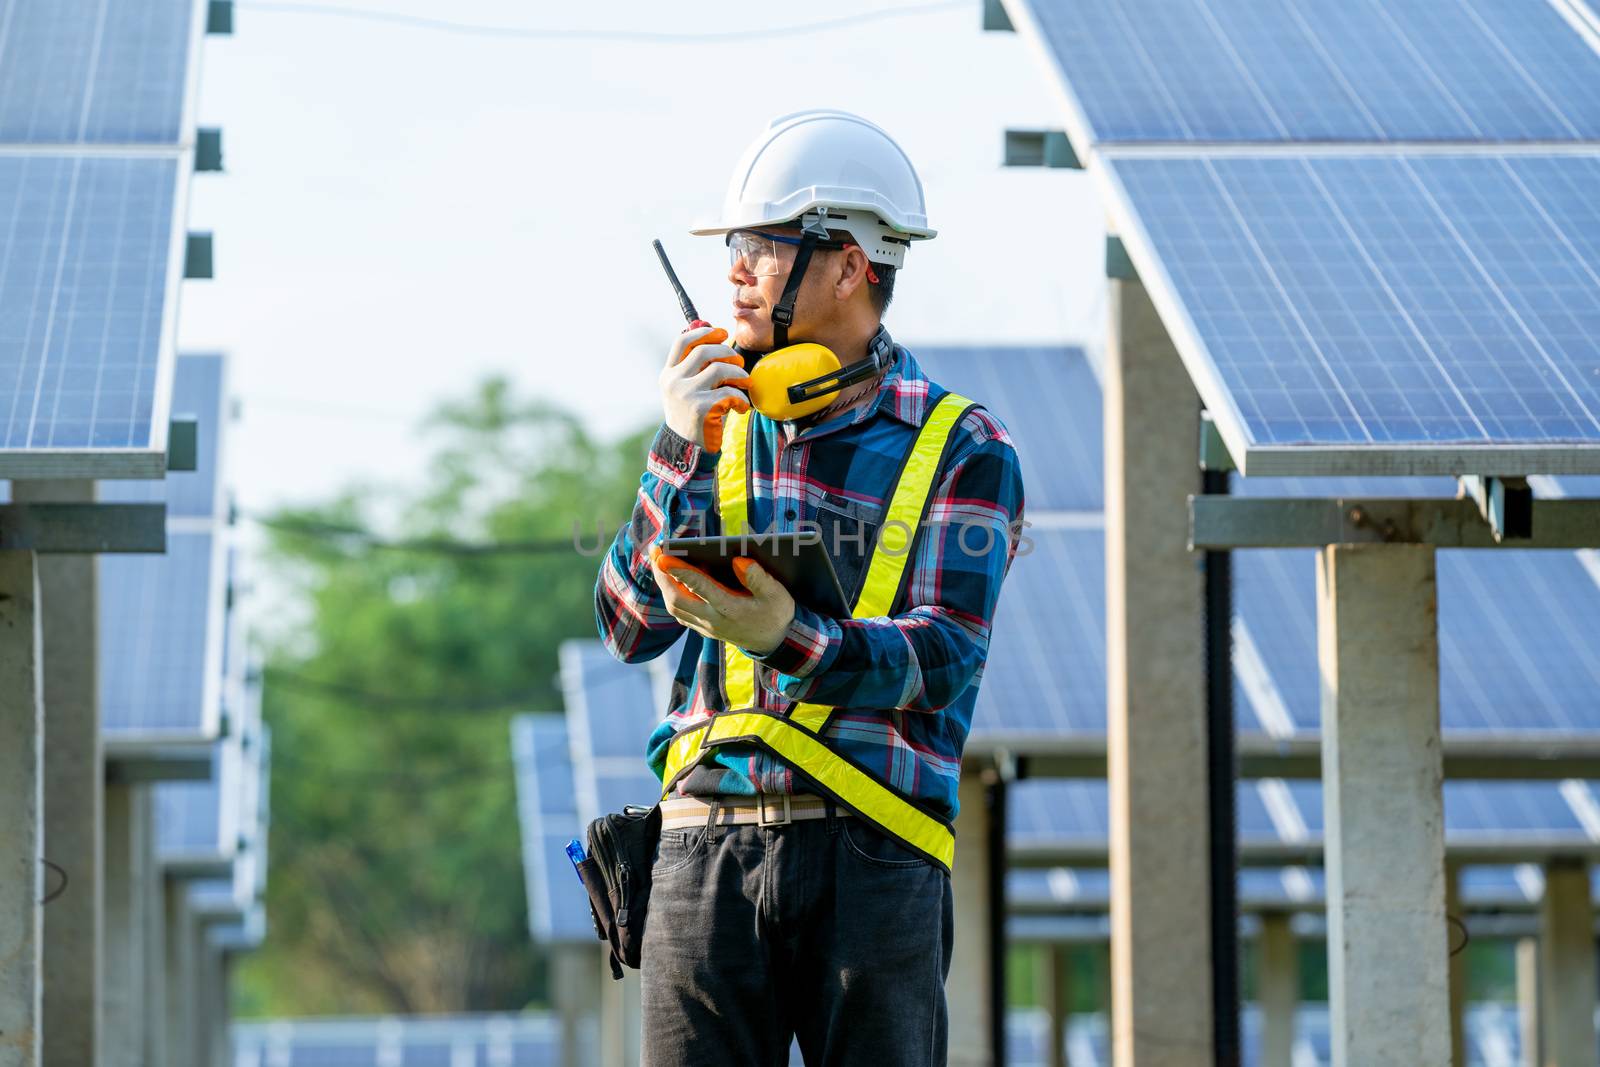 Solar power plant,Engineer working on checking and maintenance in solar power plant on a background of photovoltaic panels,Science solar energy.